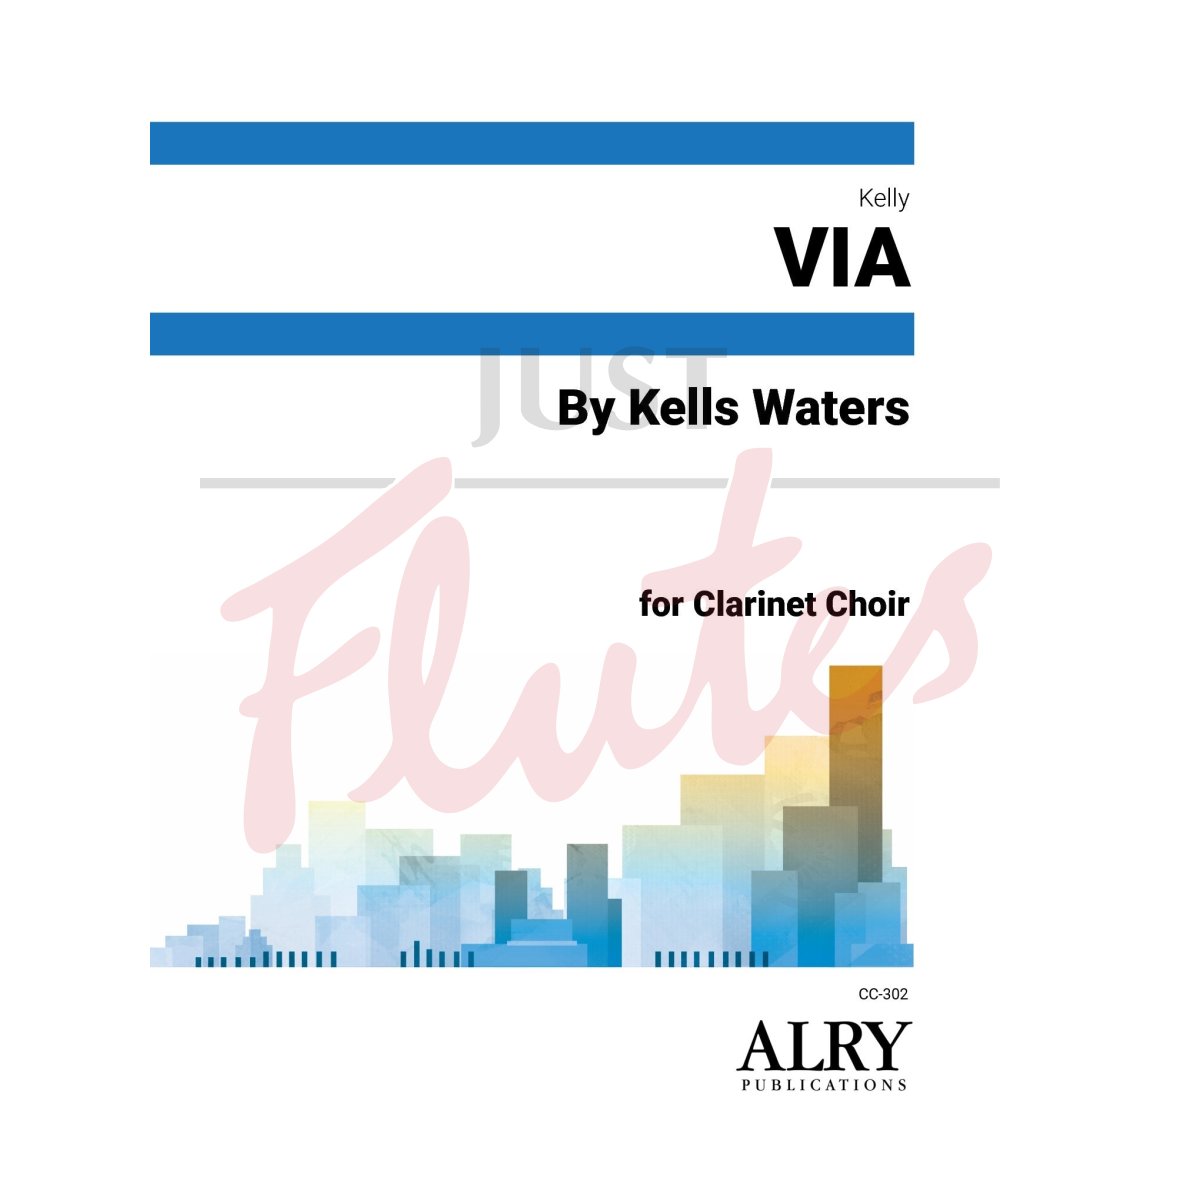 By Kells Waters for Clarinet Choir